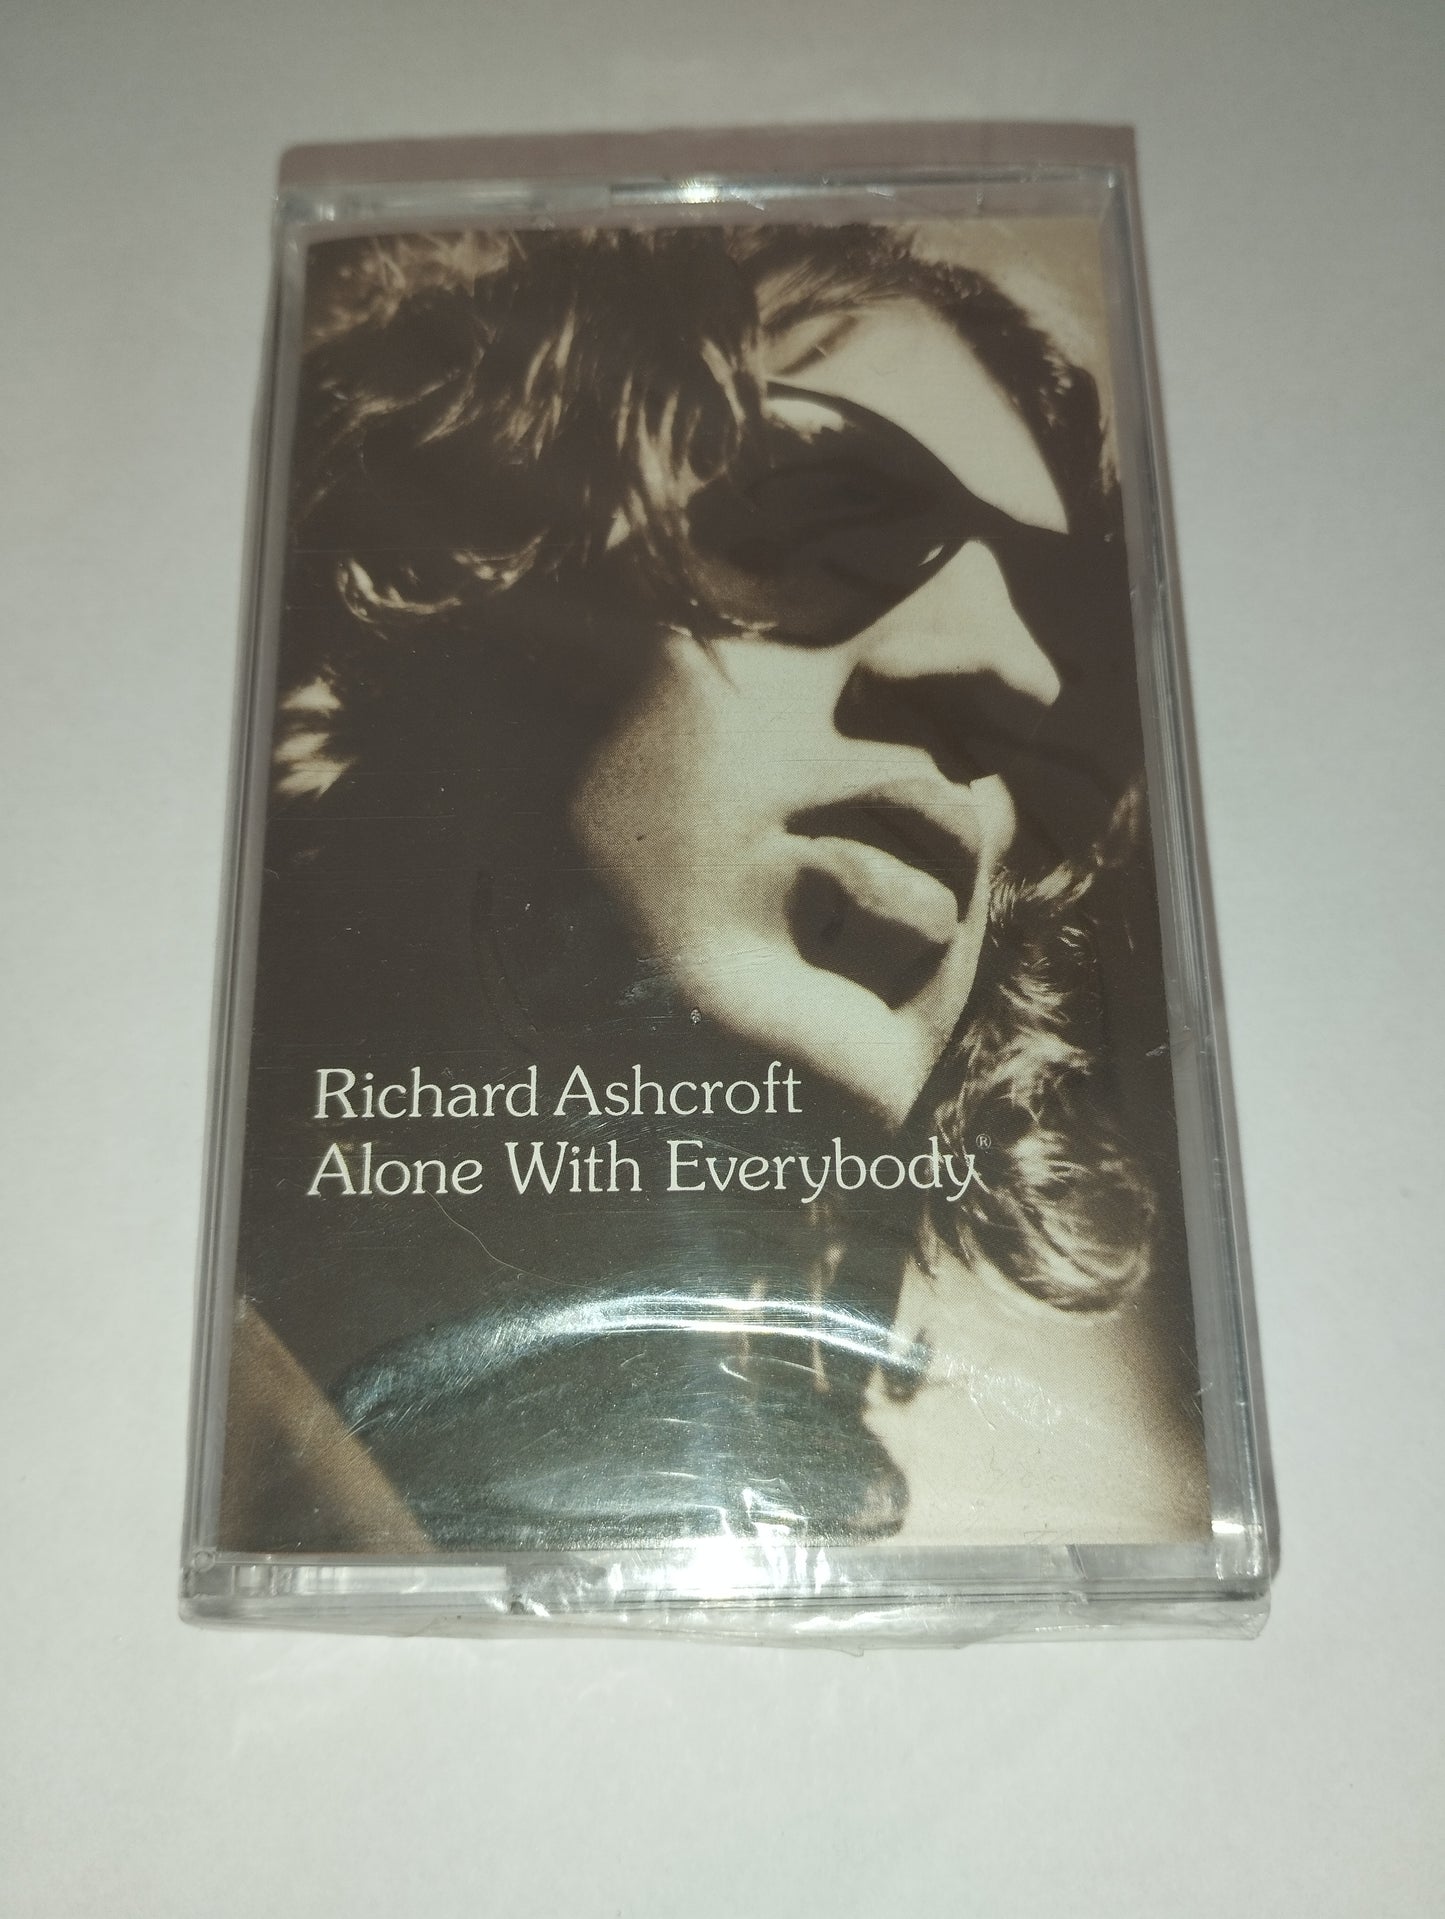 Alone With Everybody"Richard Ashcroft" Cassette